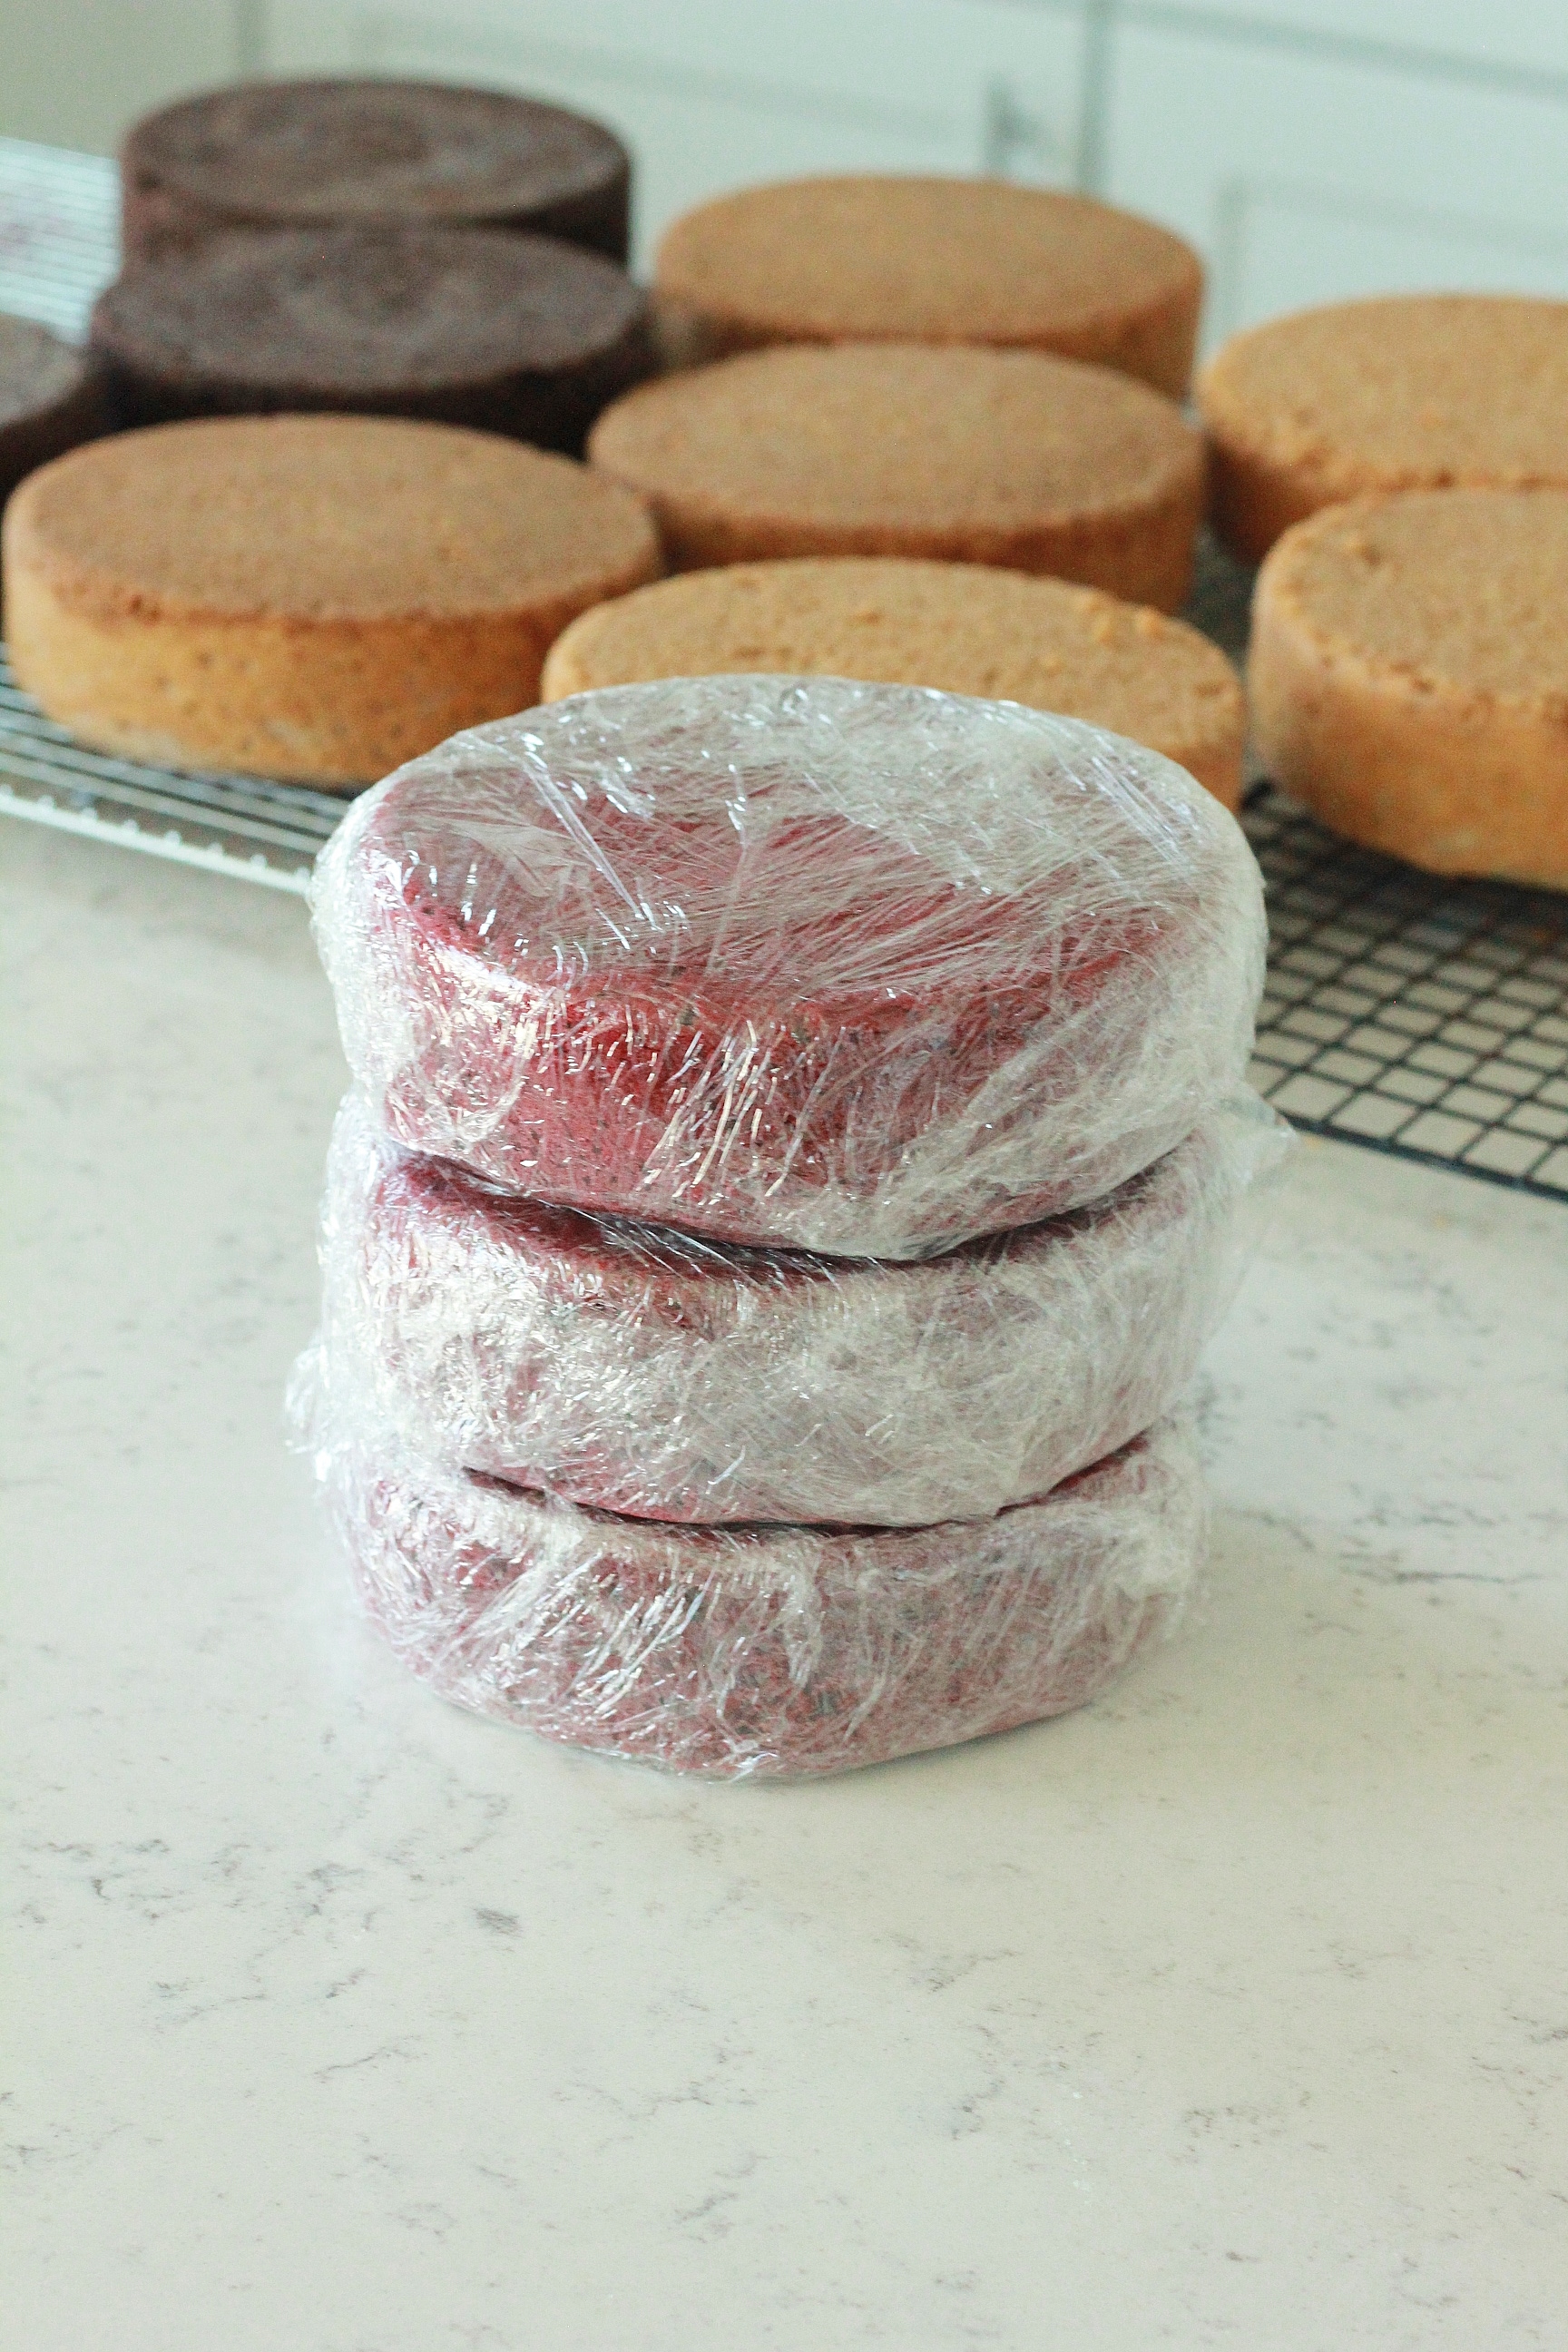 How to store cakes before freezing